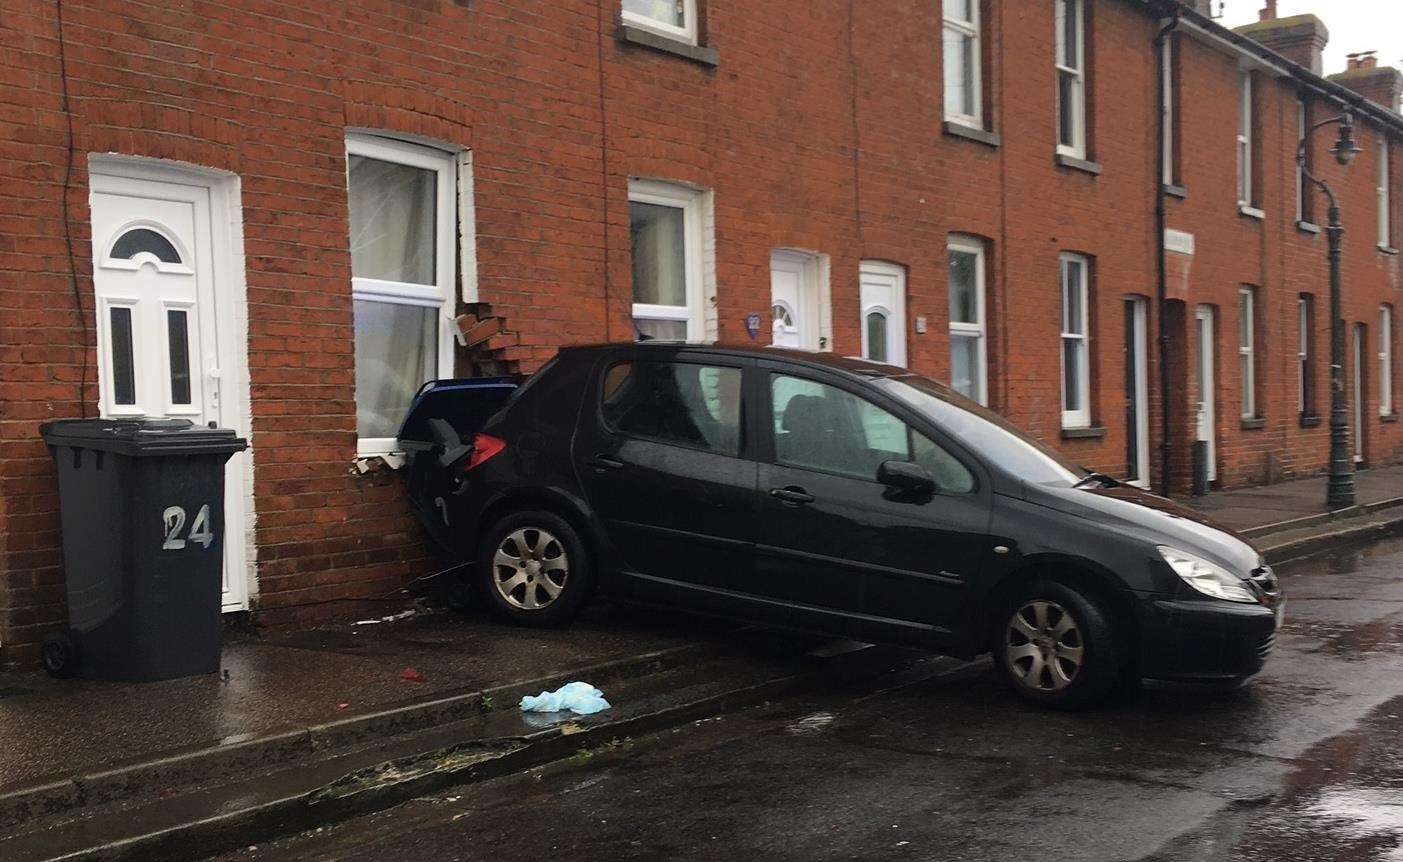 A woman was taken to hospital after the crash